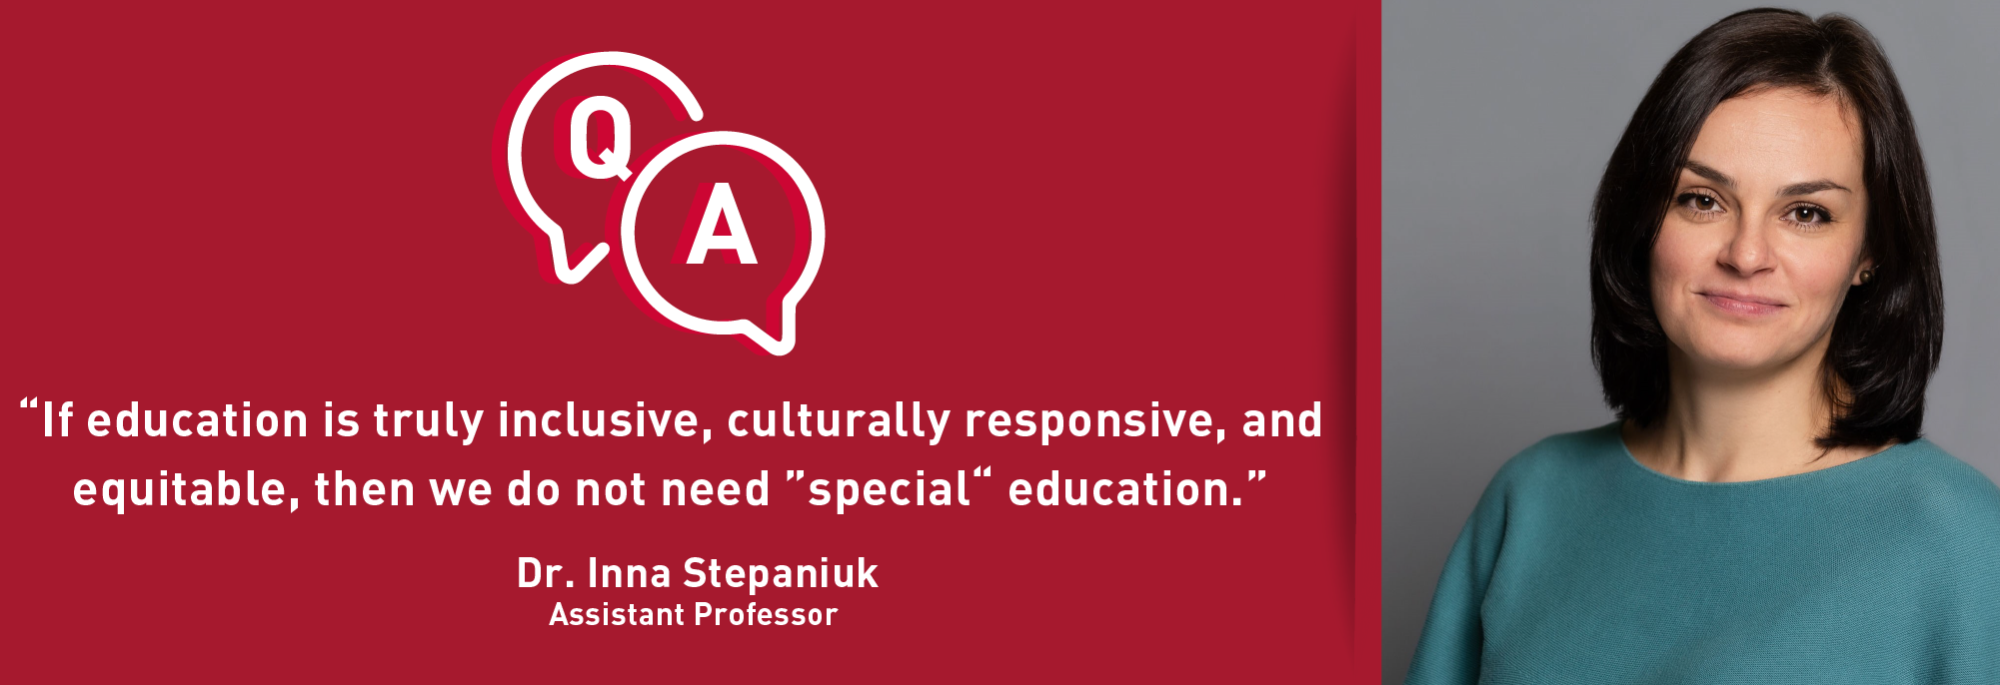 "If education is truly inclusive, culturally responsive, and equitable, then we do not need "special" education."  Photo of Dr. Inna Stepaniuk, Assistant Professor.